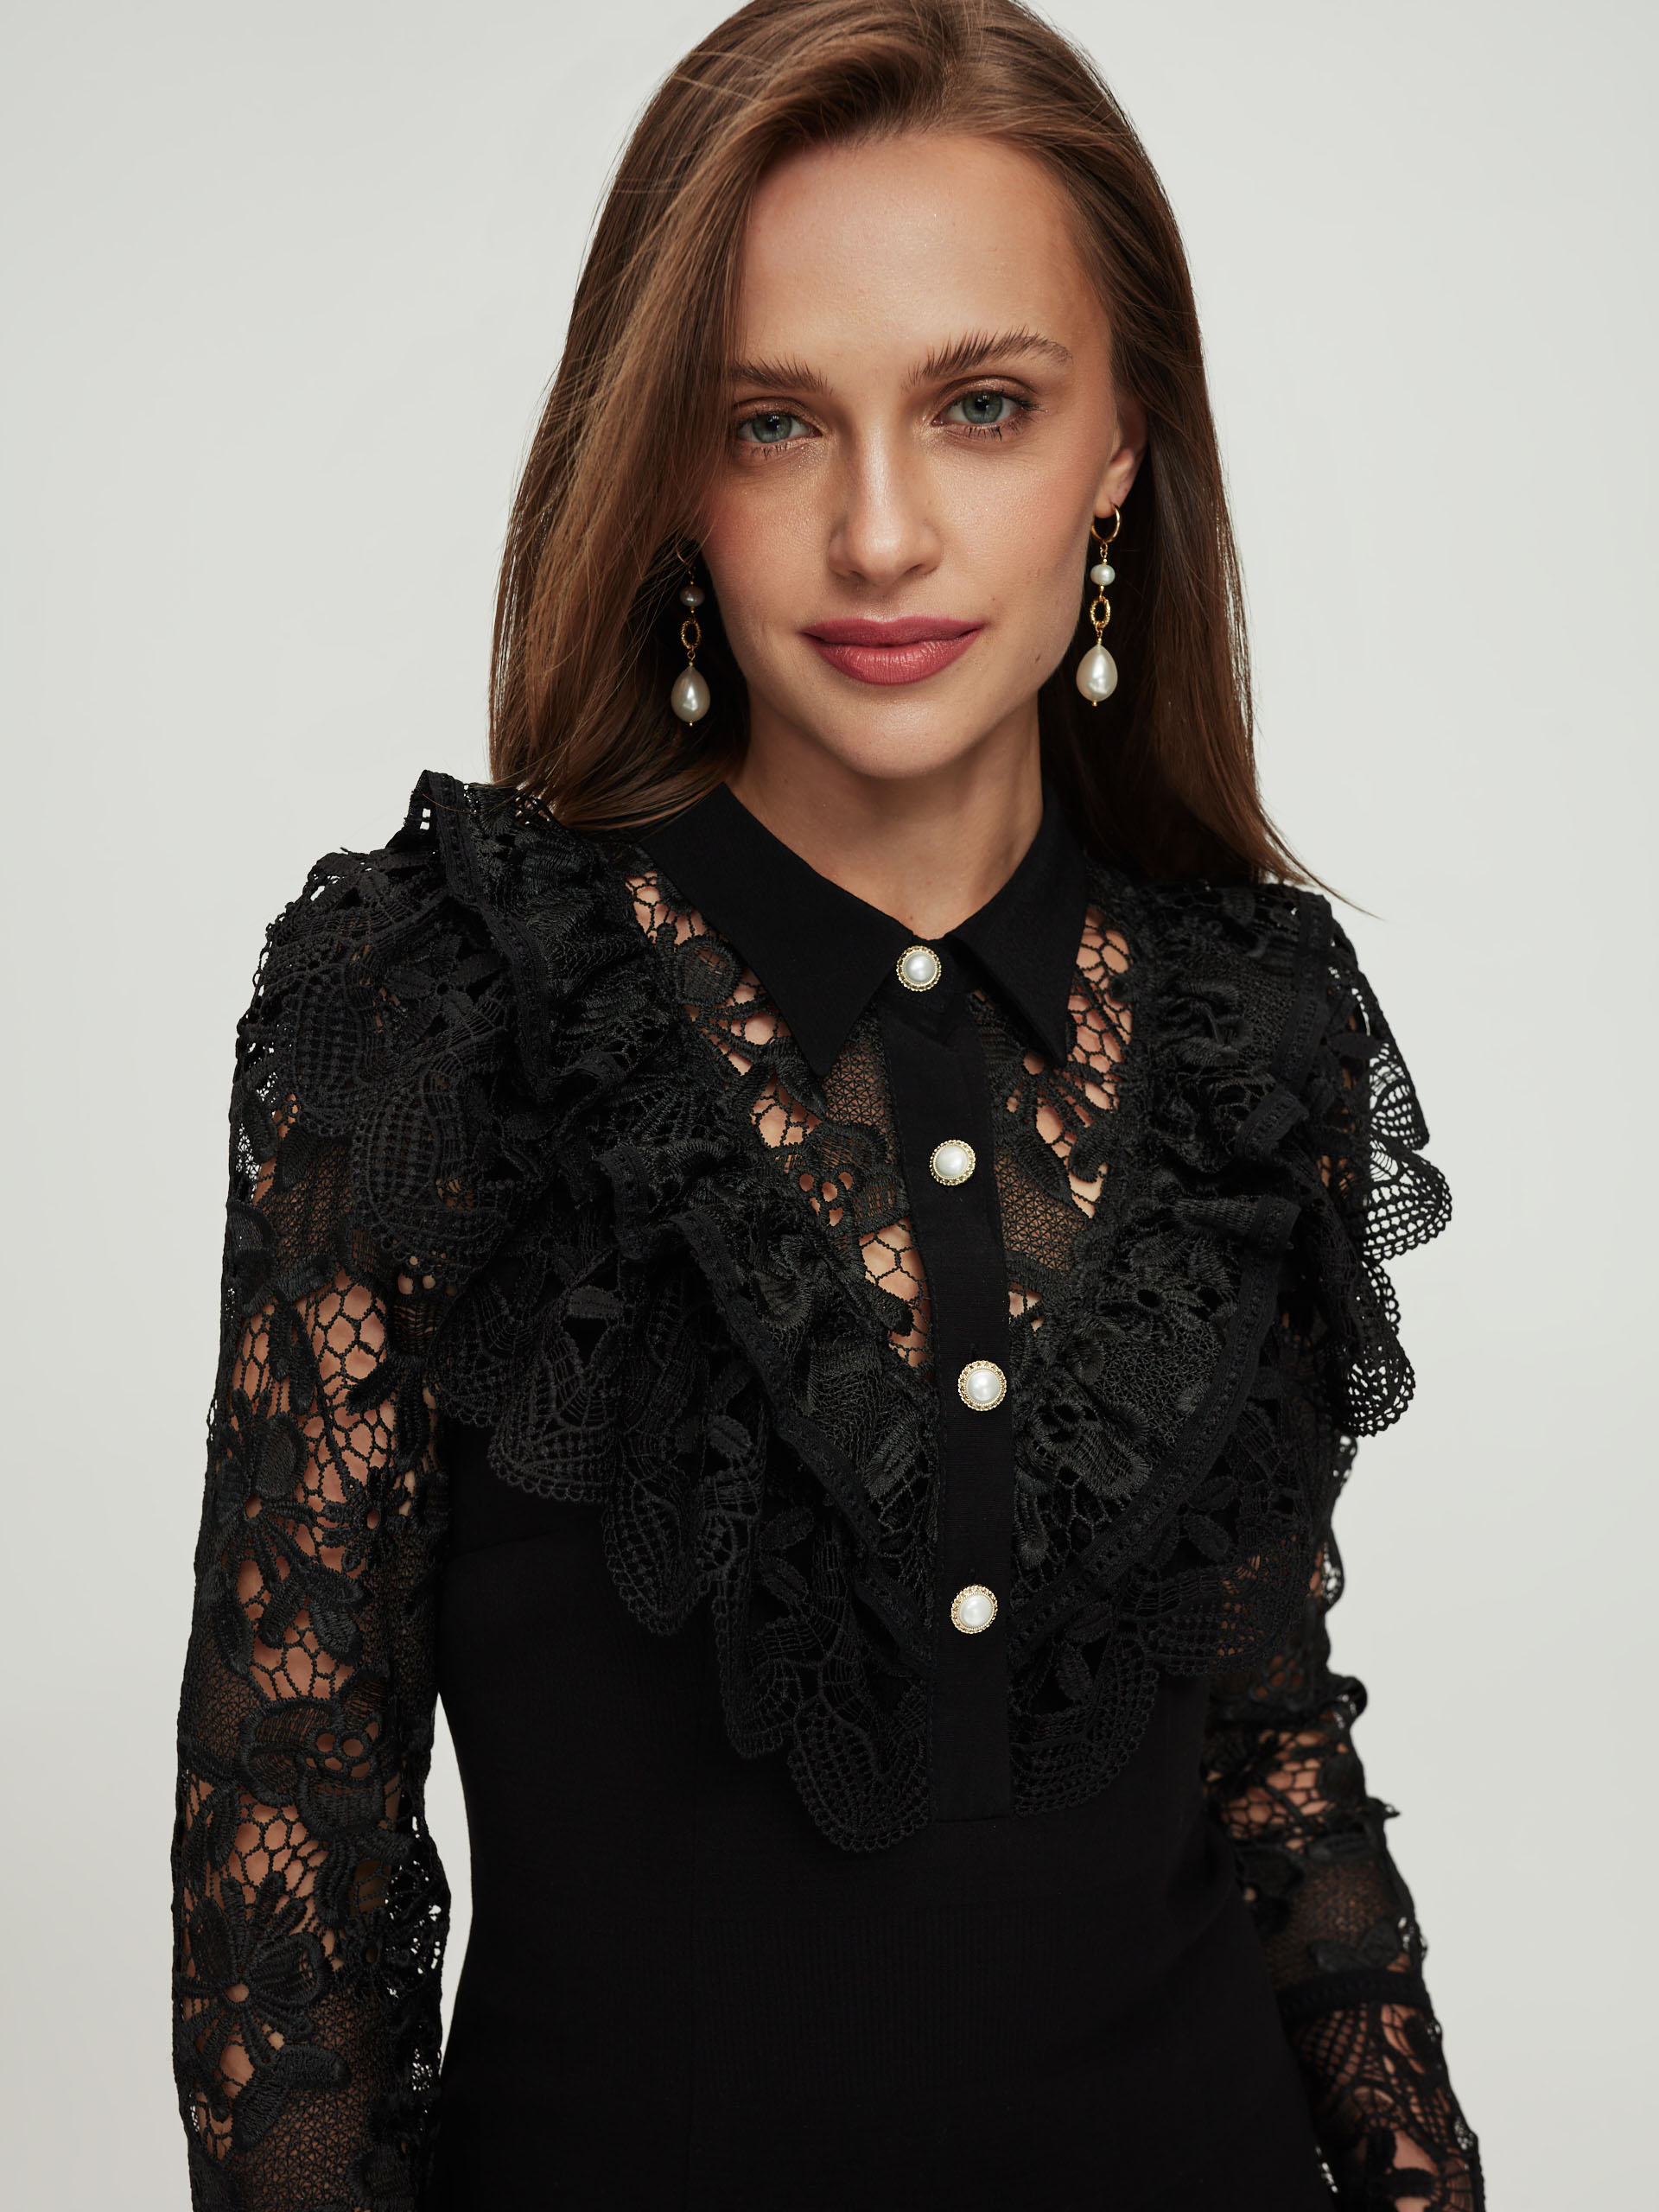 Black dress with lace sleeves